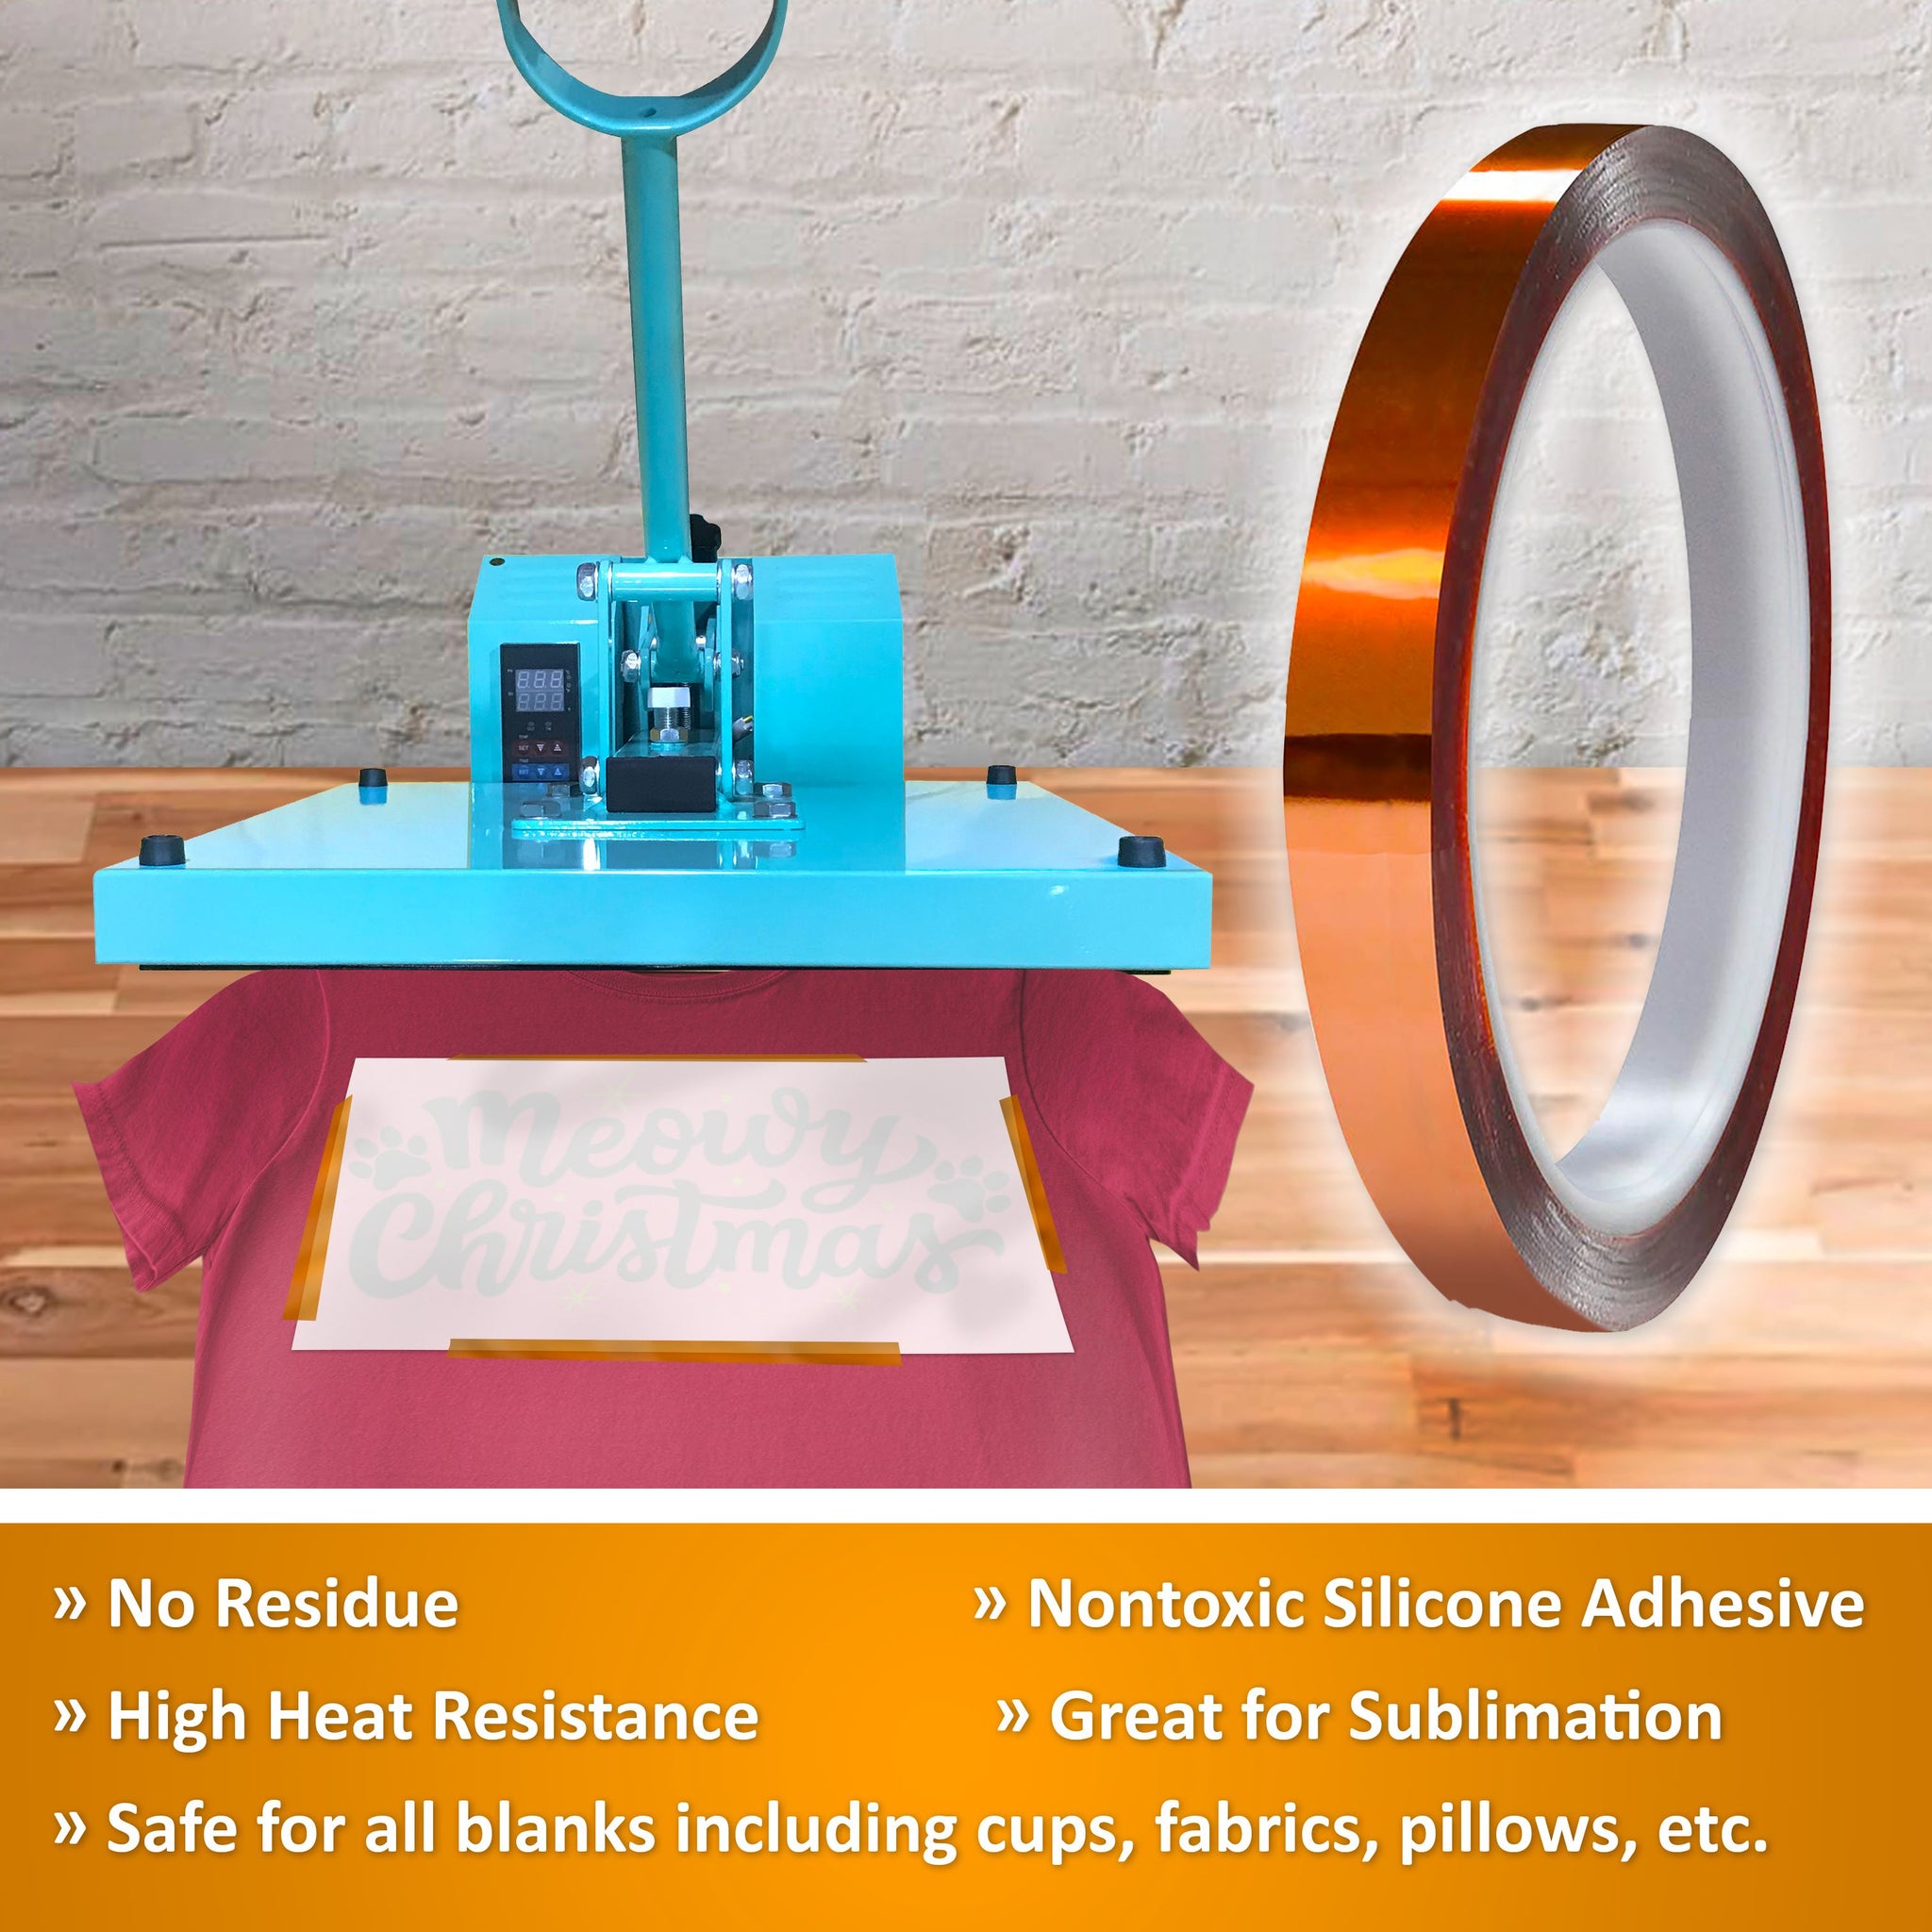 Sublimation Heat Tape  Heat Resistant Tape for Sublimation Printing